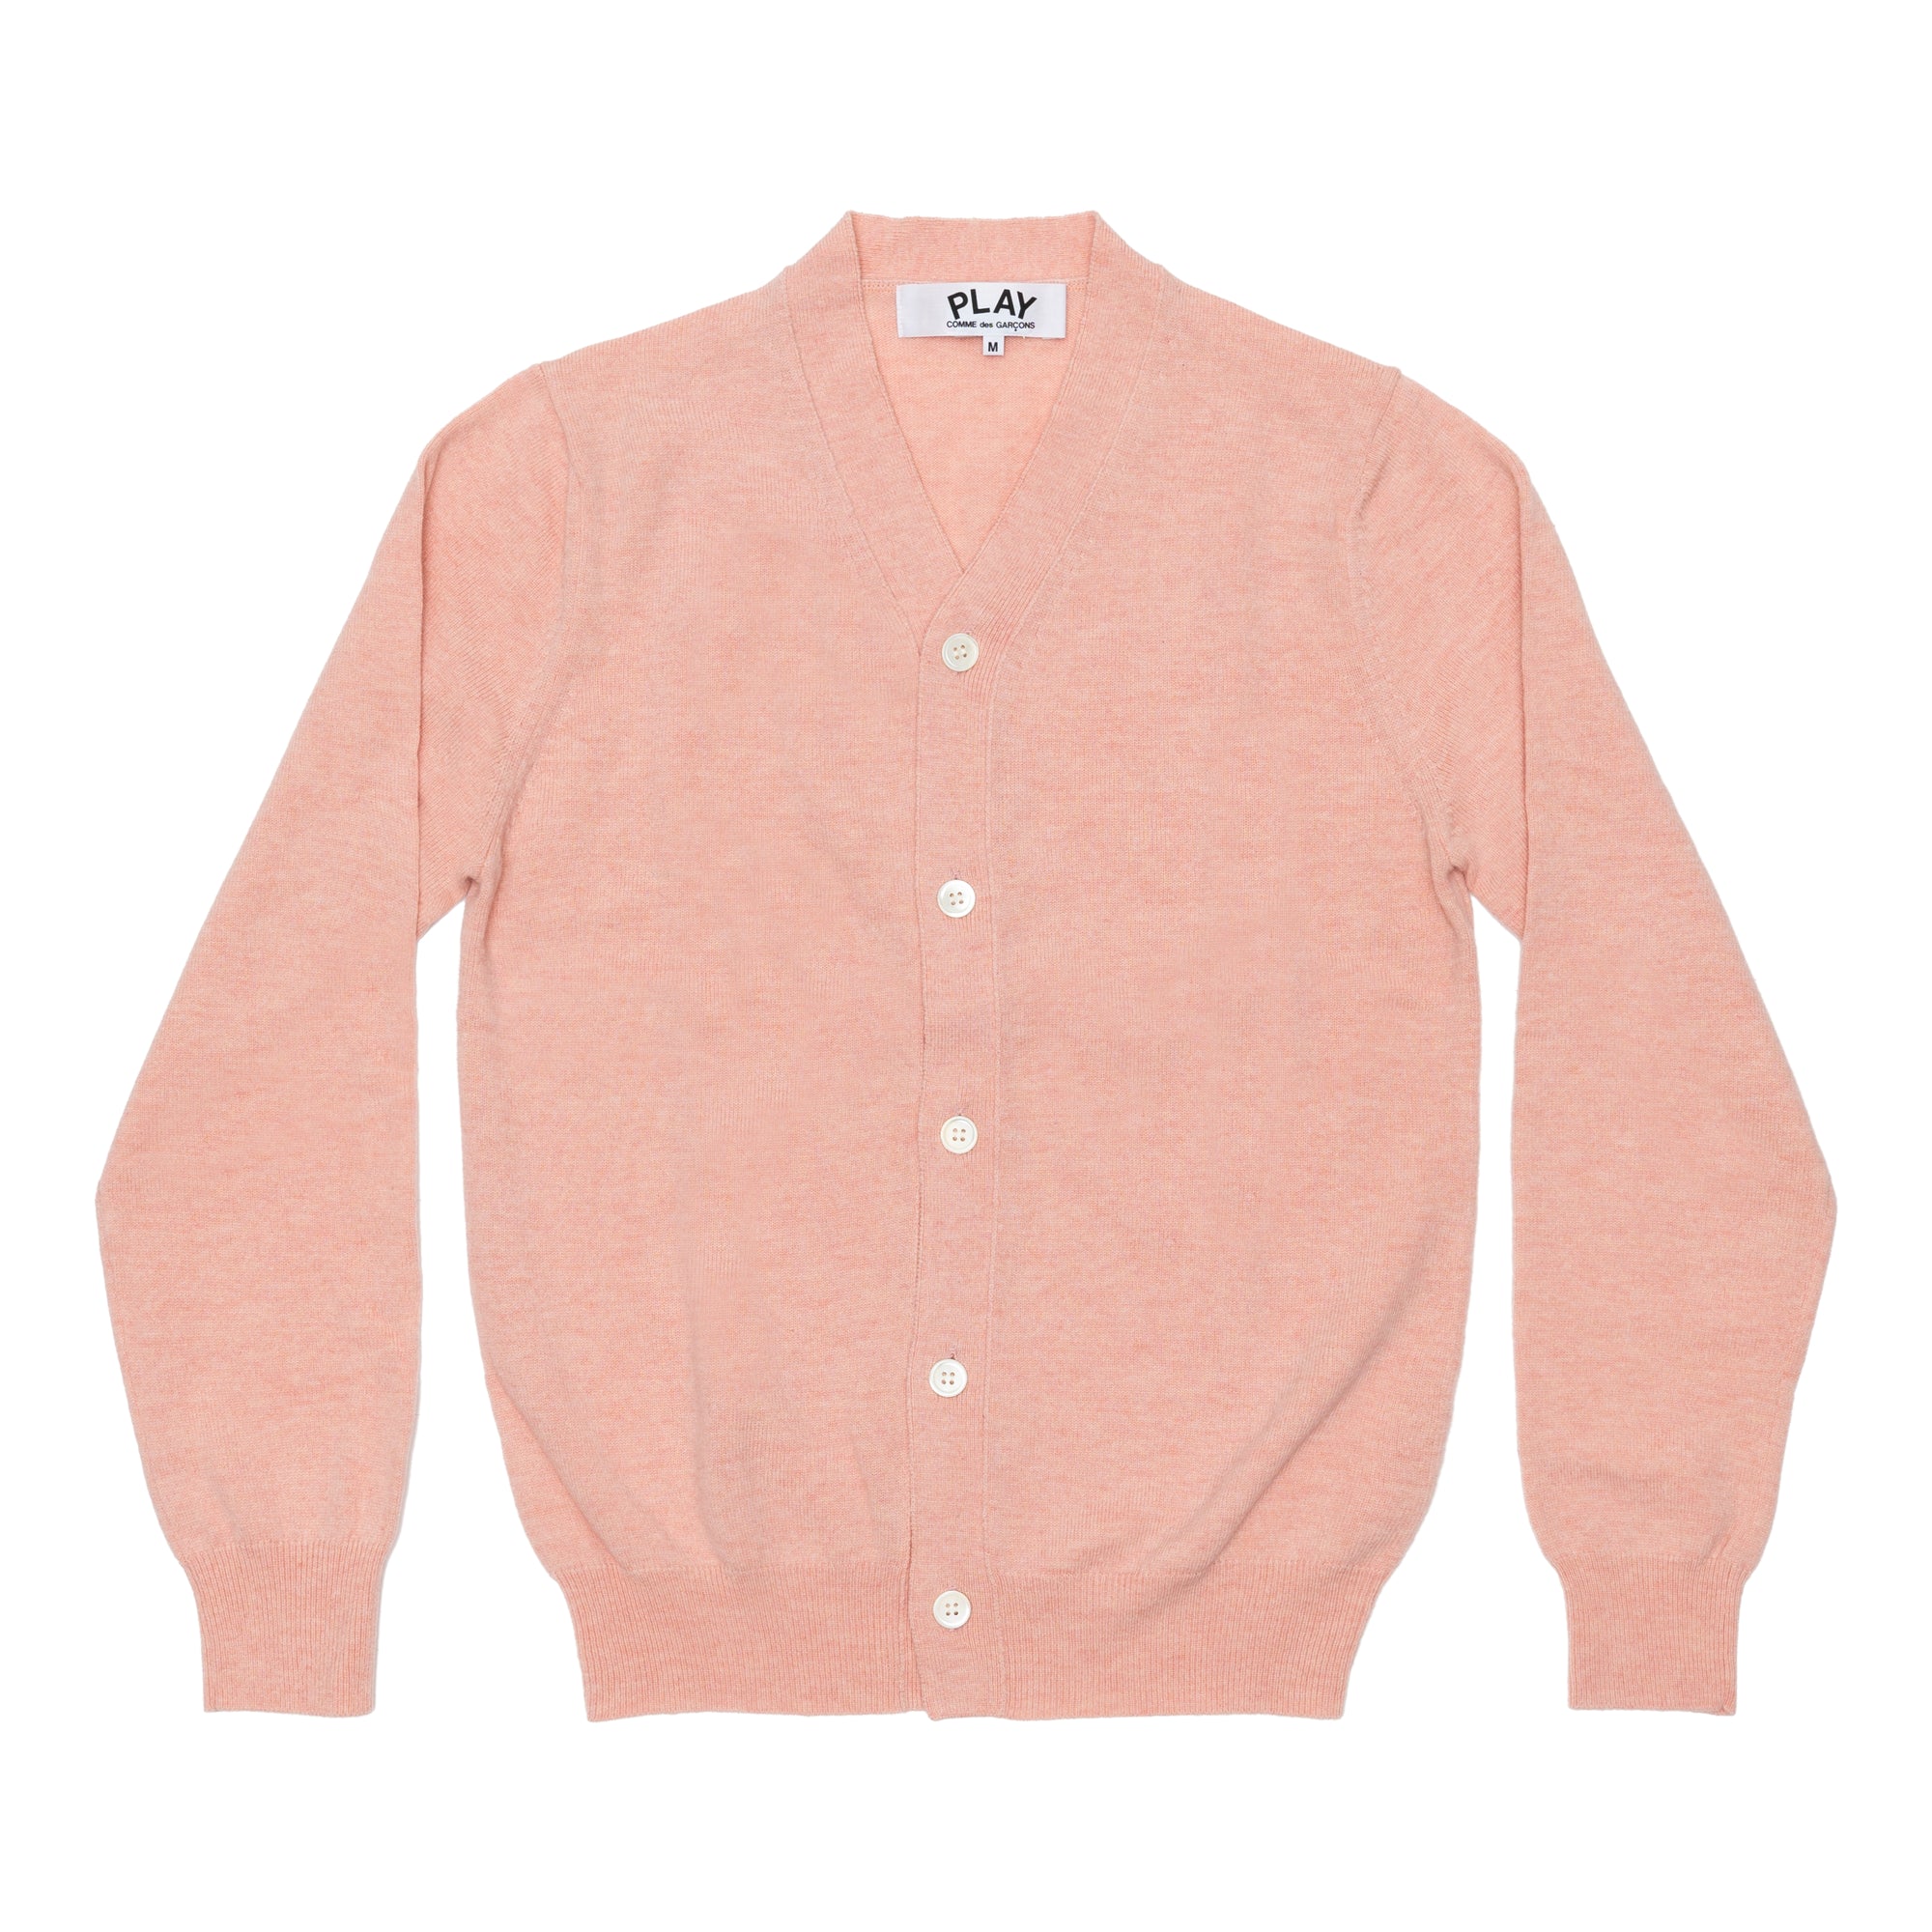 PLAY CDG  - Top Dyed Carded Lambswool Men's Cardigan - (Pink) view 1